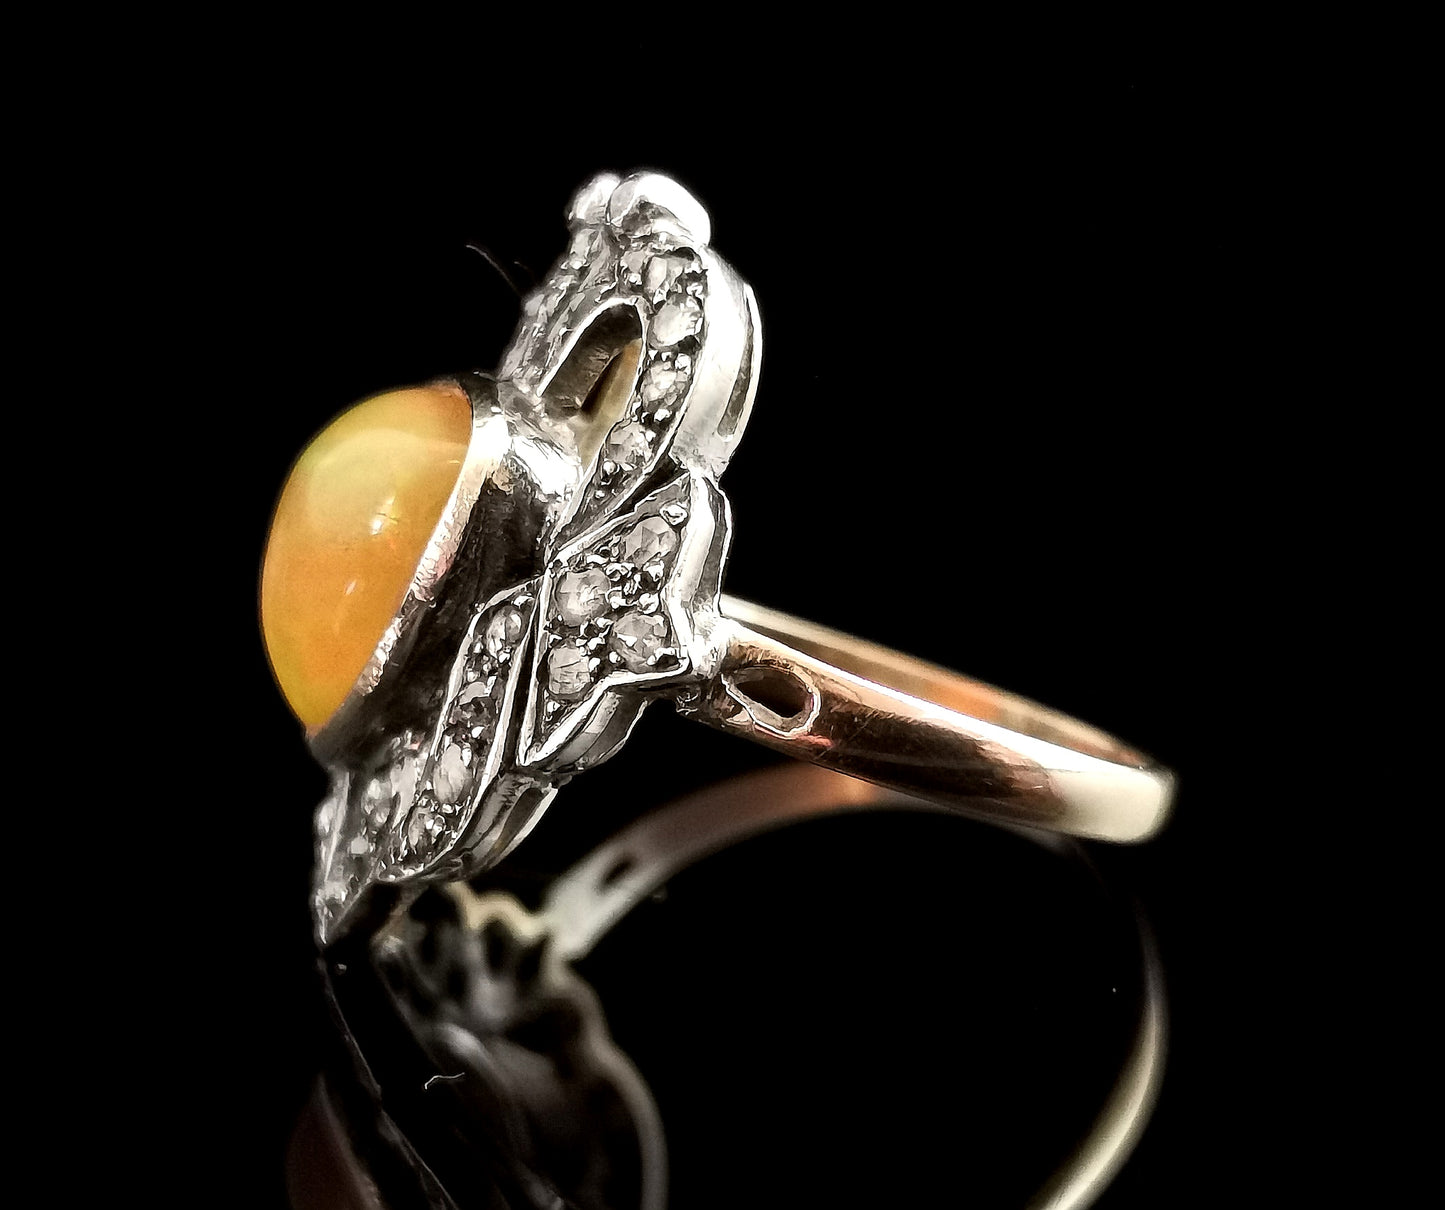 Antique Opal and diamond ring, 9ct gold and silver, Art Nouveau